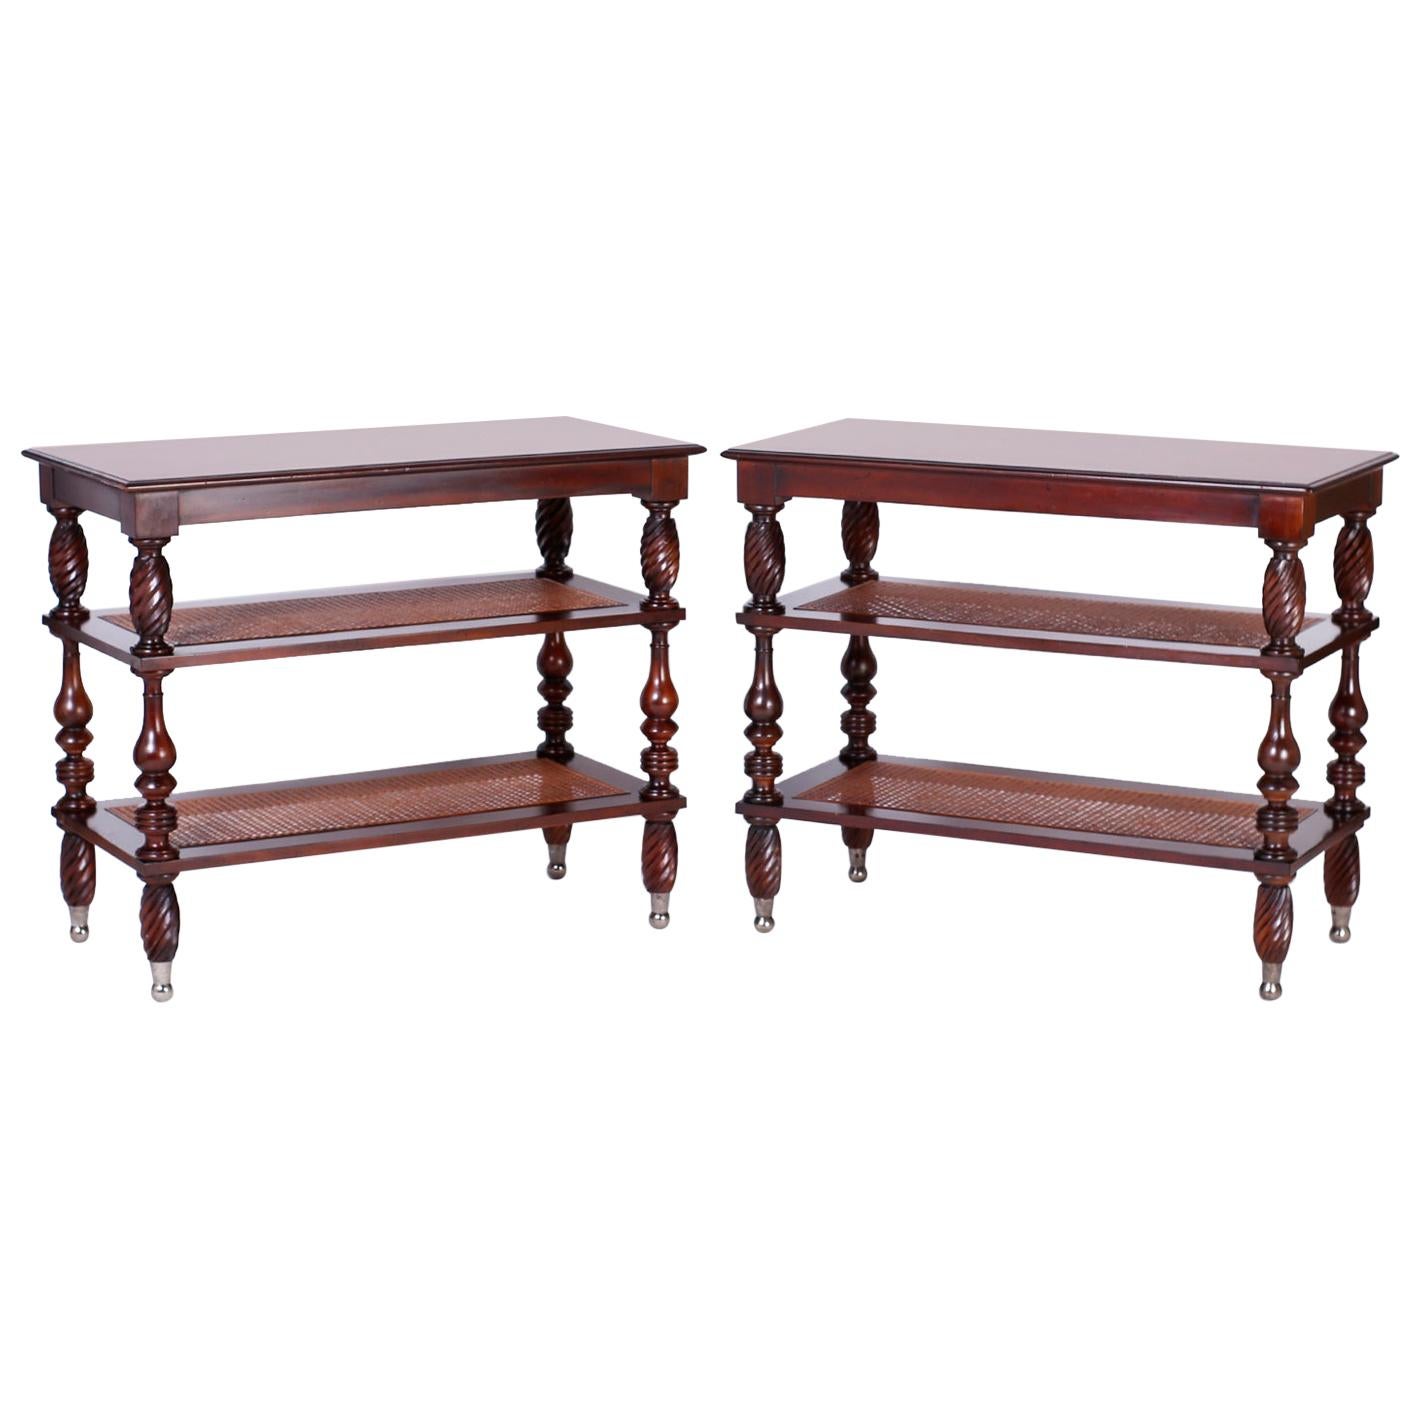 Pair of British Colonial Style Three-Tiered Stands